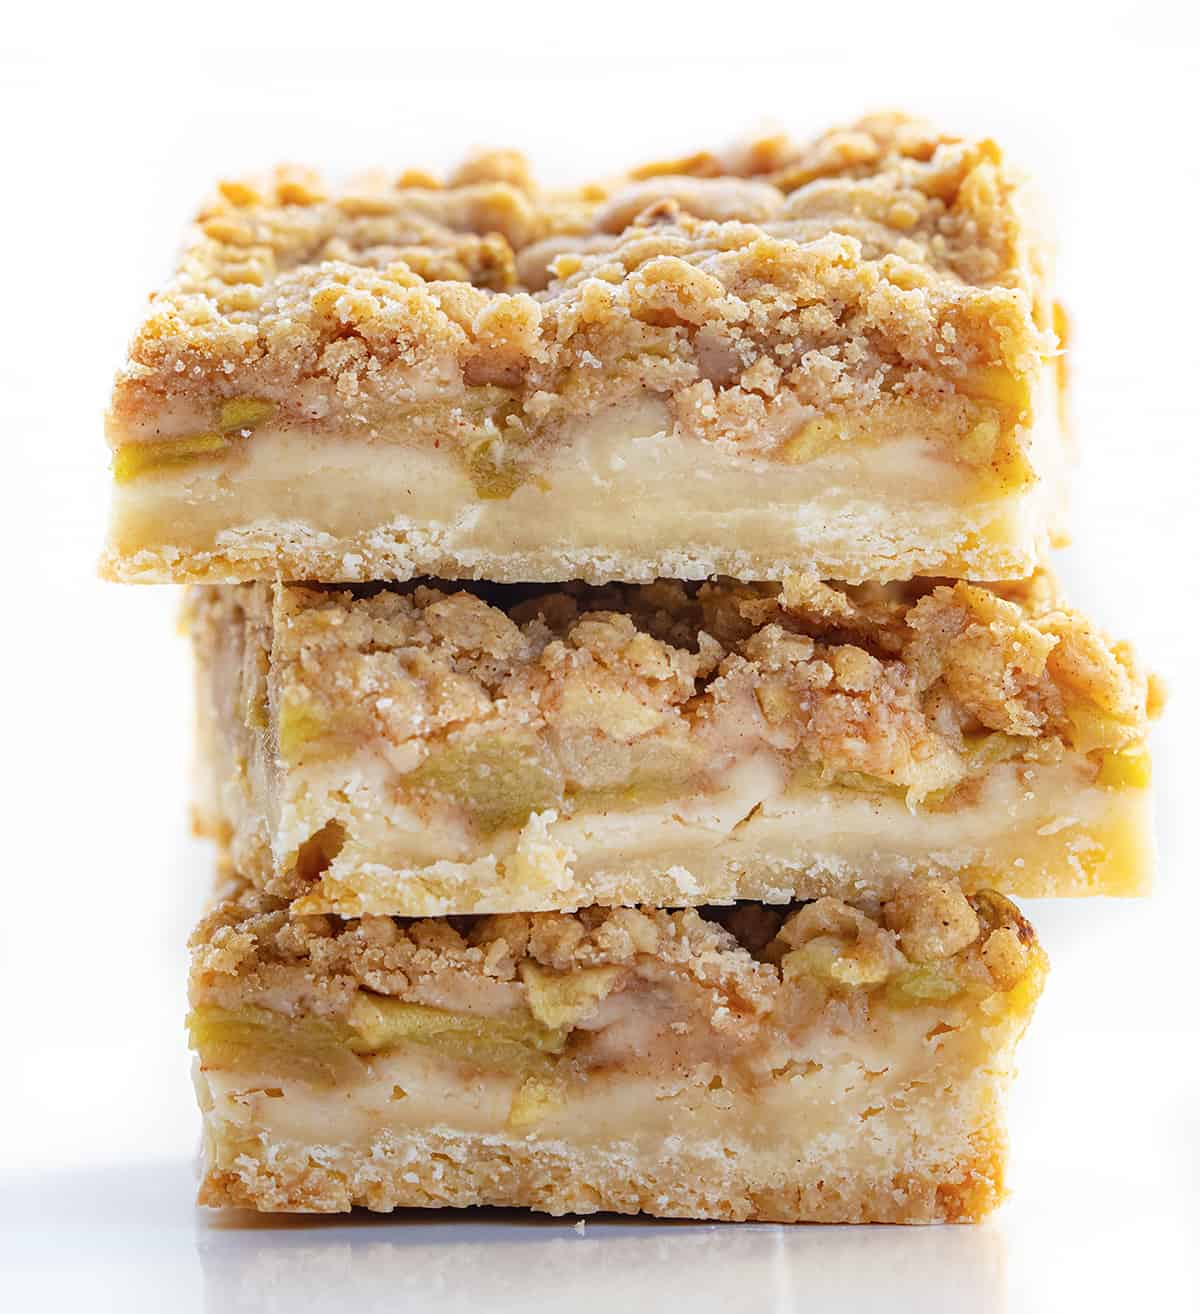 Stack of Apple Shortbread Bars on White Counter.